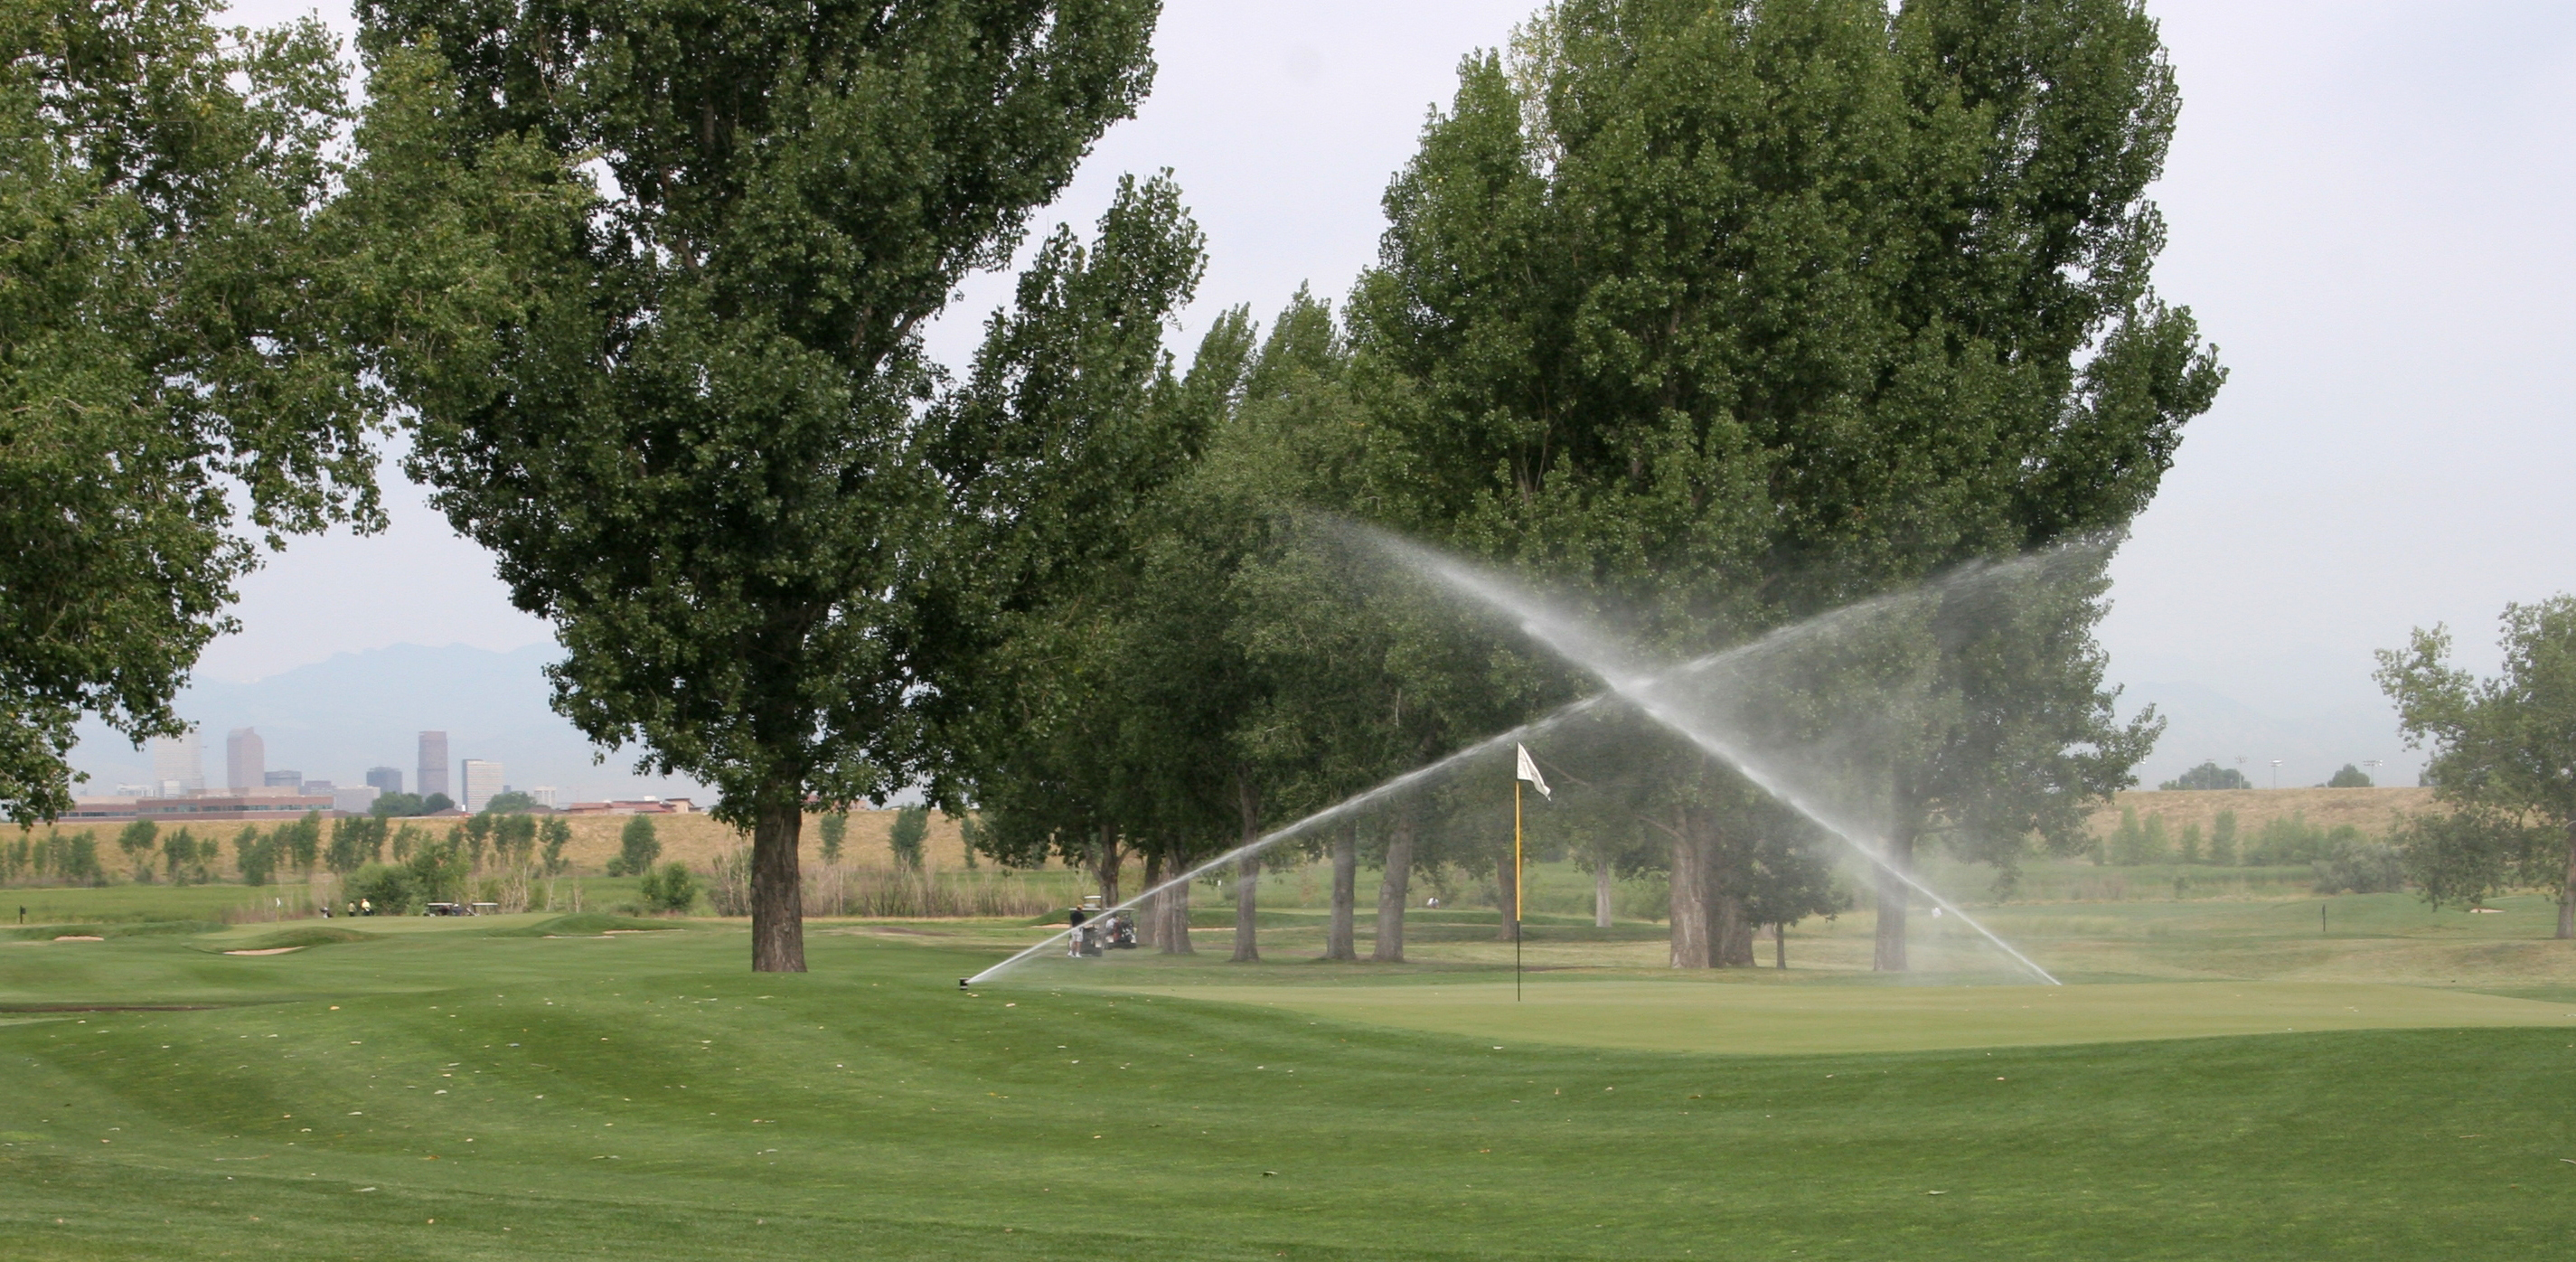 Denver uses recycled water for irrigation at City Park Golf Course and 34 other parks